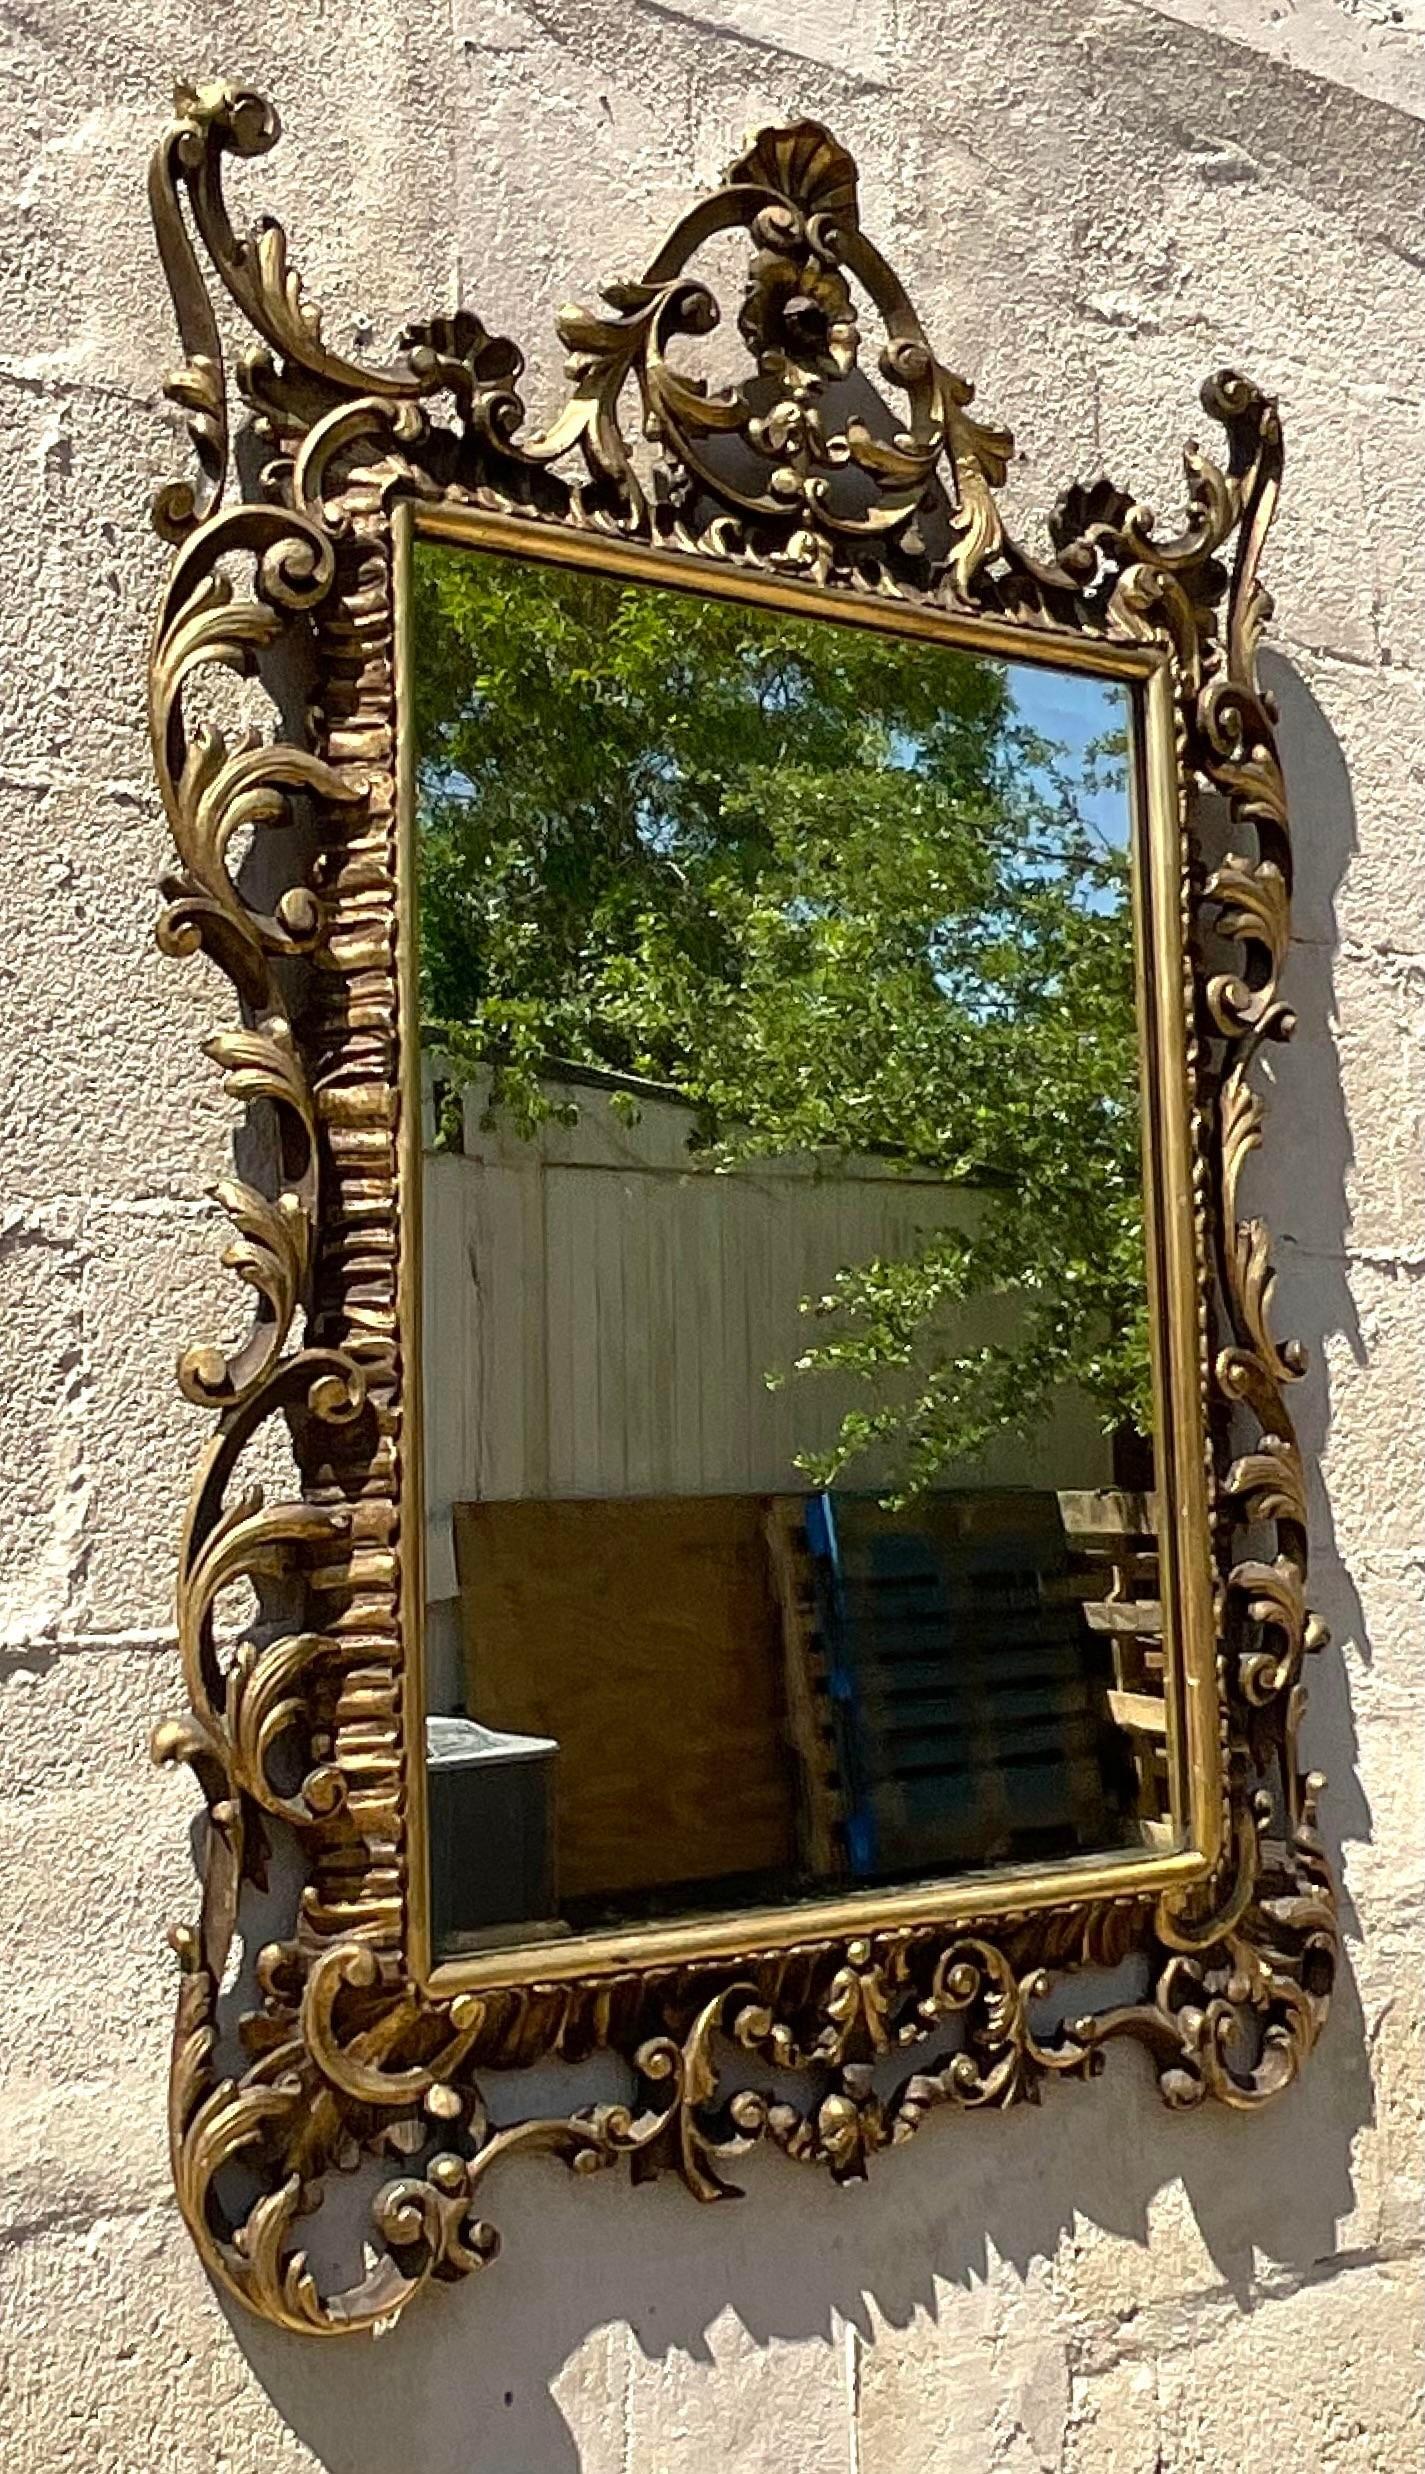 Experience timeless luxury with our Vintage Regency Gilt Carved Mirror. Infused with American elegance, this mirror boasts intricate carved details and a lustrous gilt finish, blending classic Regency design with opulent charm for a refined